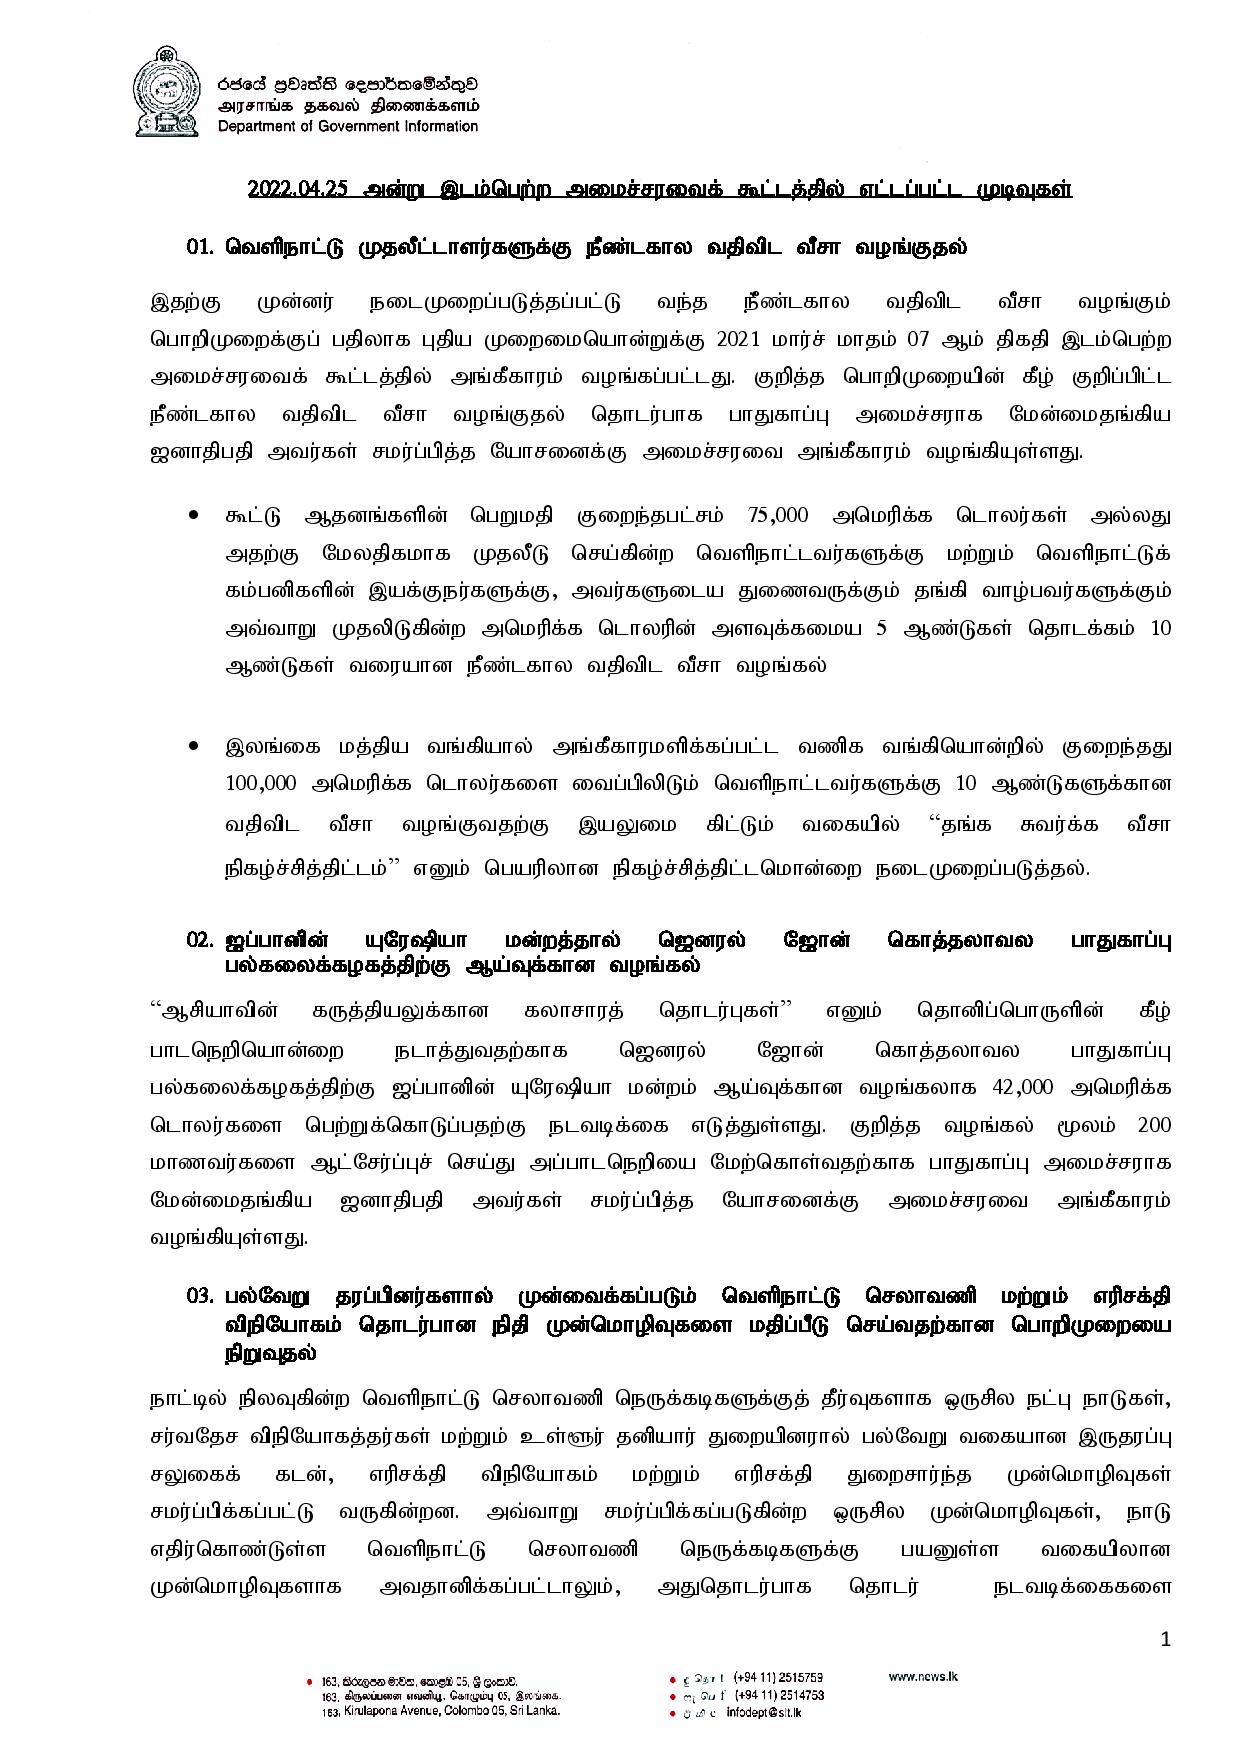 Cabinet Decisions on 25.04.2022 Tamil page 001